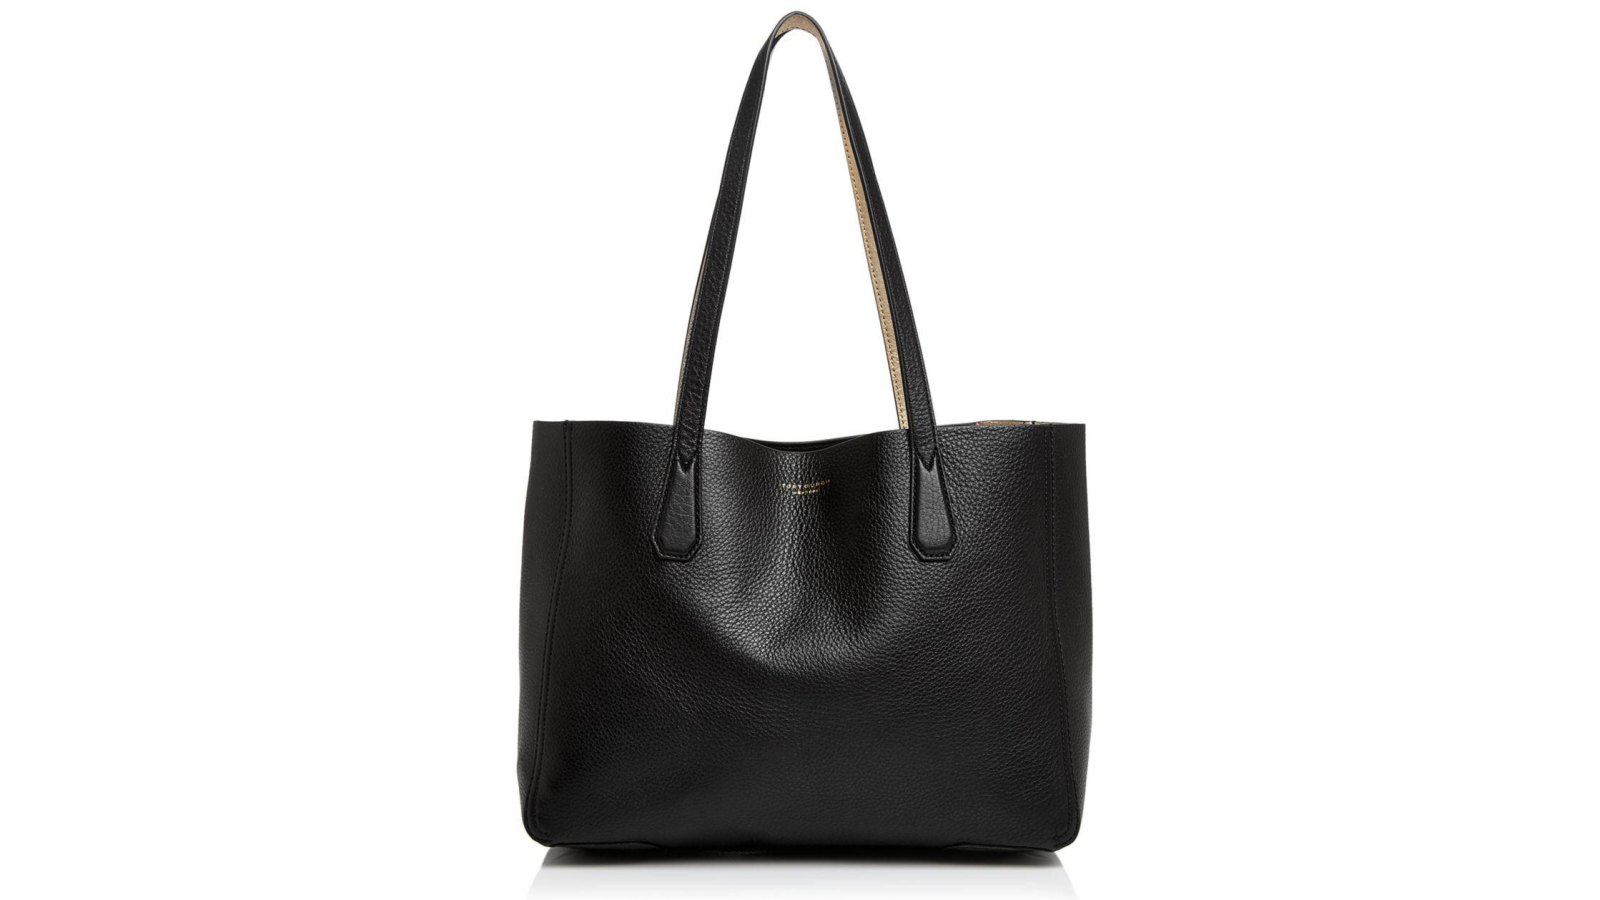 Tory Burch  Black Tote Bag Handbag Saffiano Leather Gold Hardware Used  Twice - $167 - From Courtney